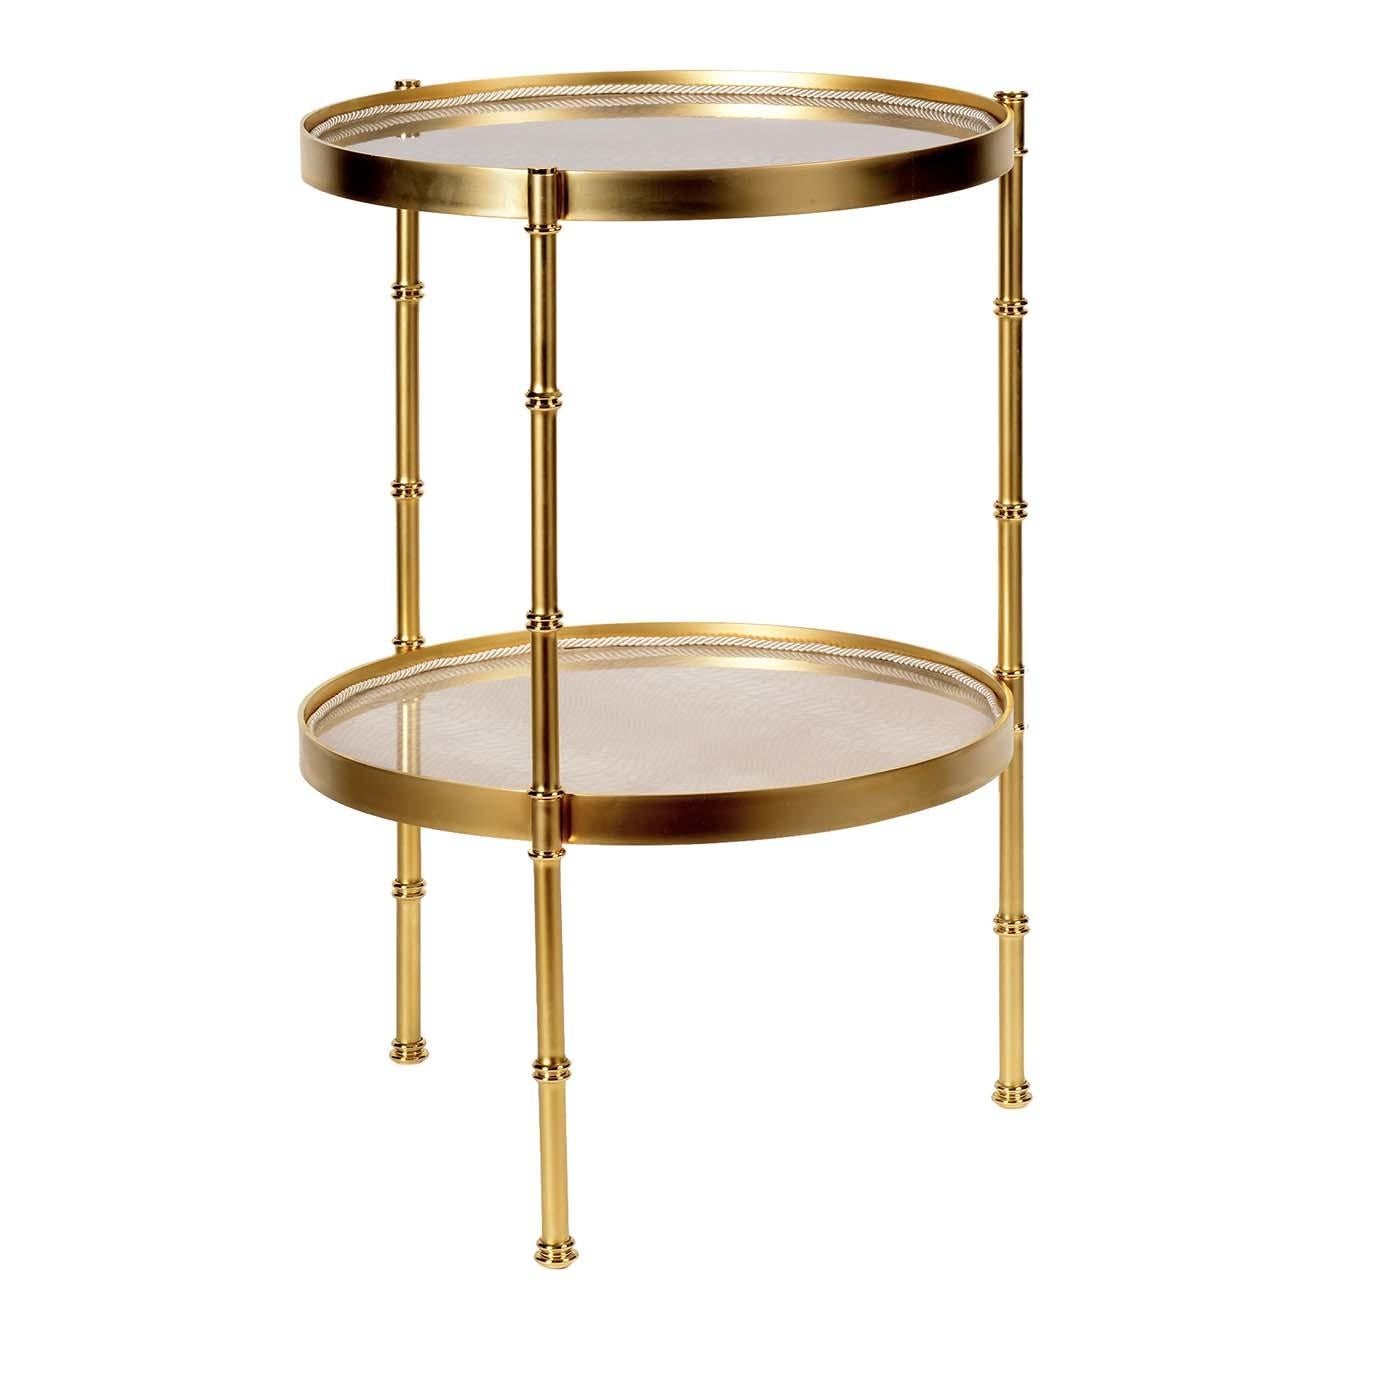 Defined by a streamlined silhouette and skilled woodworking craftsmanship, this stunning tea table will add a touch of sophistication to a living room or lounge decor. The open frame is handcrafted of brass with a satin gold finish and features